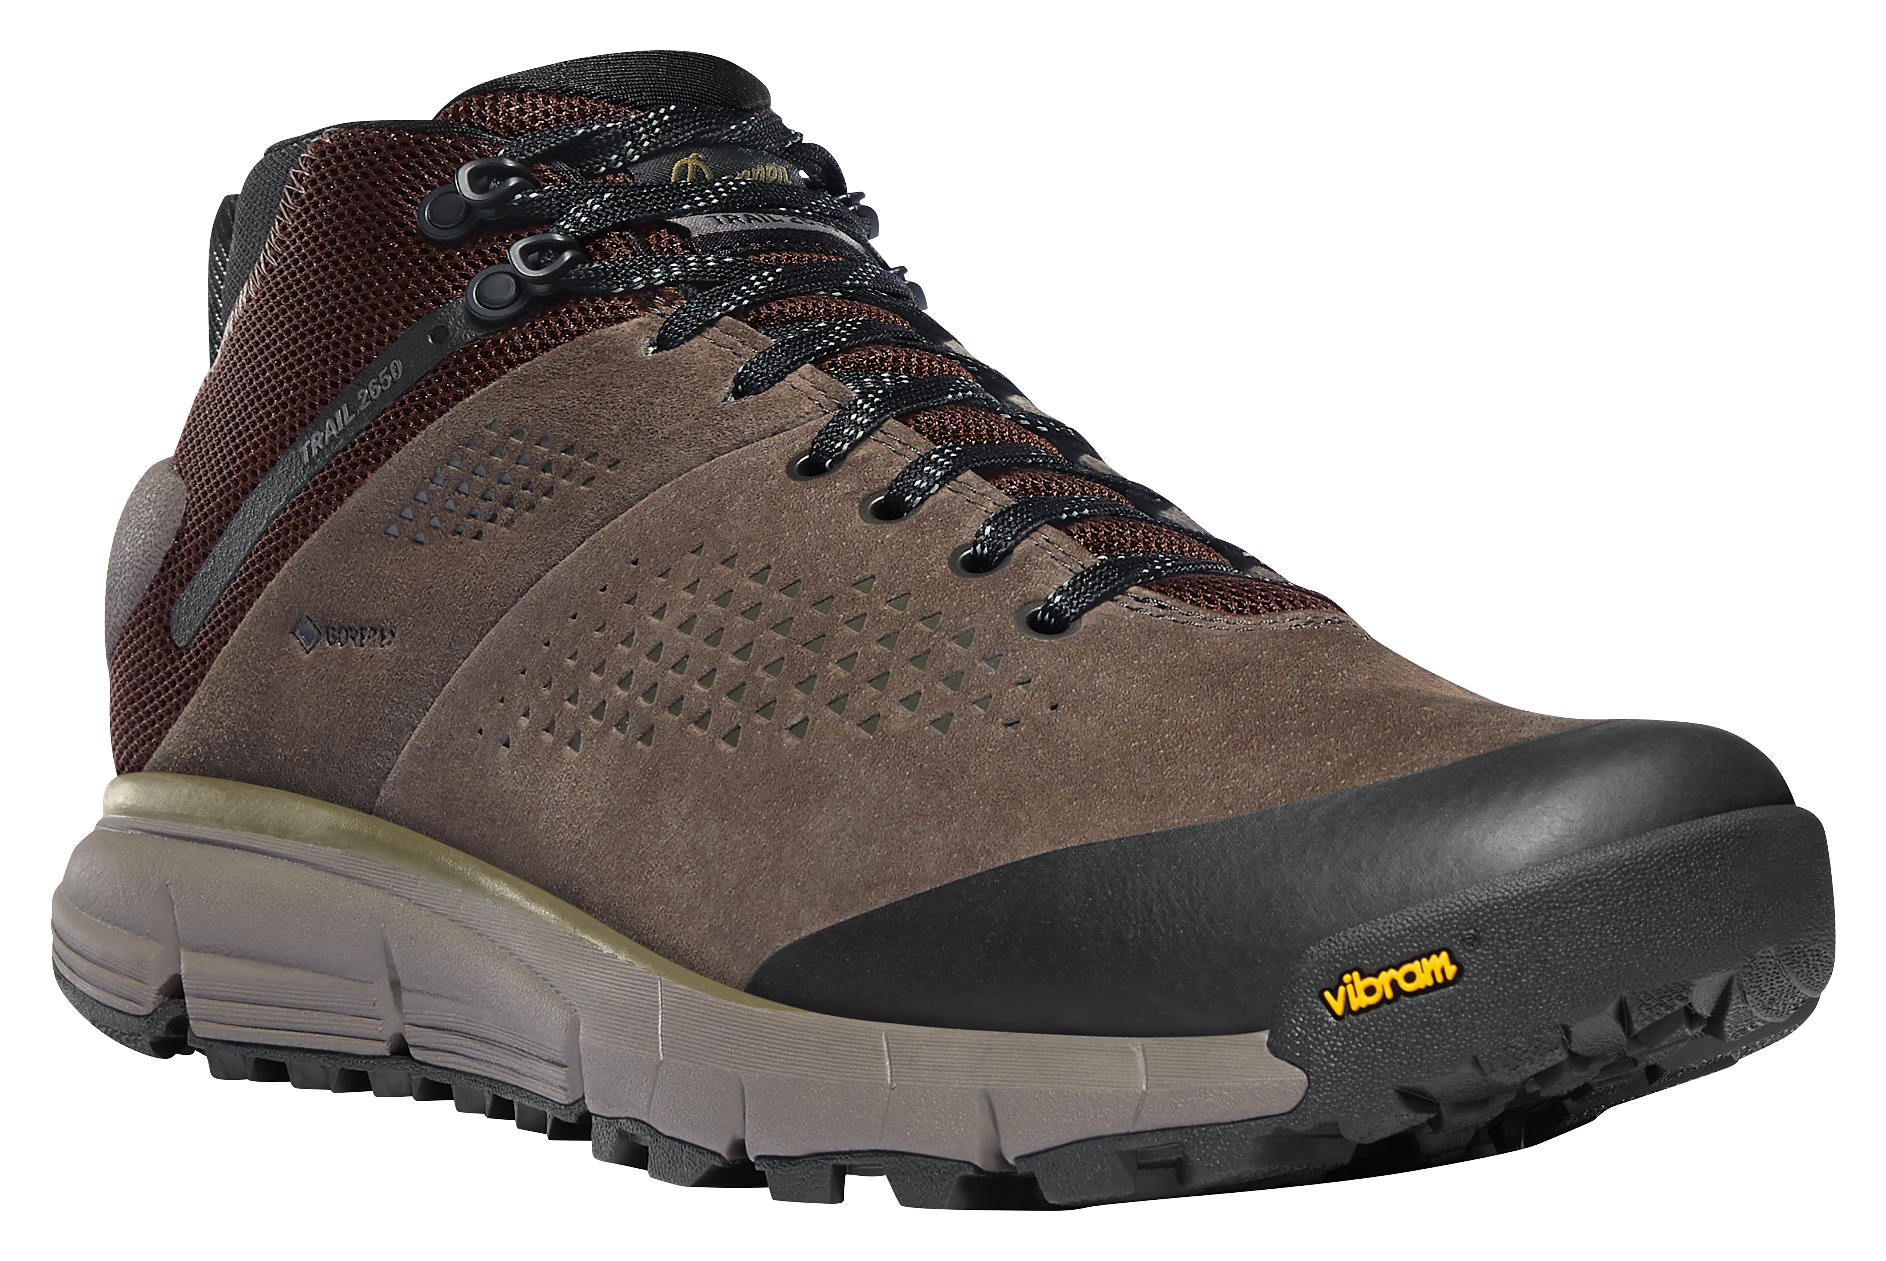 Danner Trail 2650 Mid GORE-TEX Hiking Boots for Men